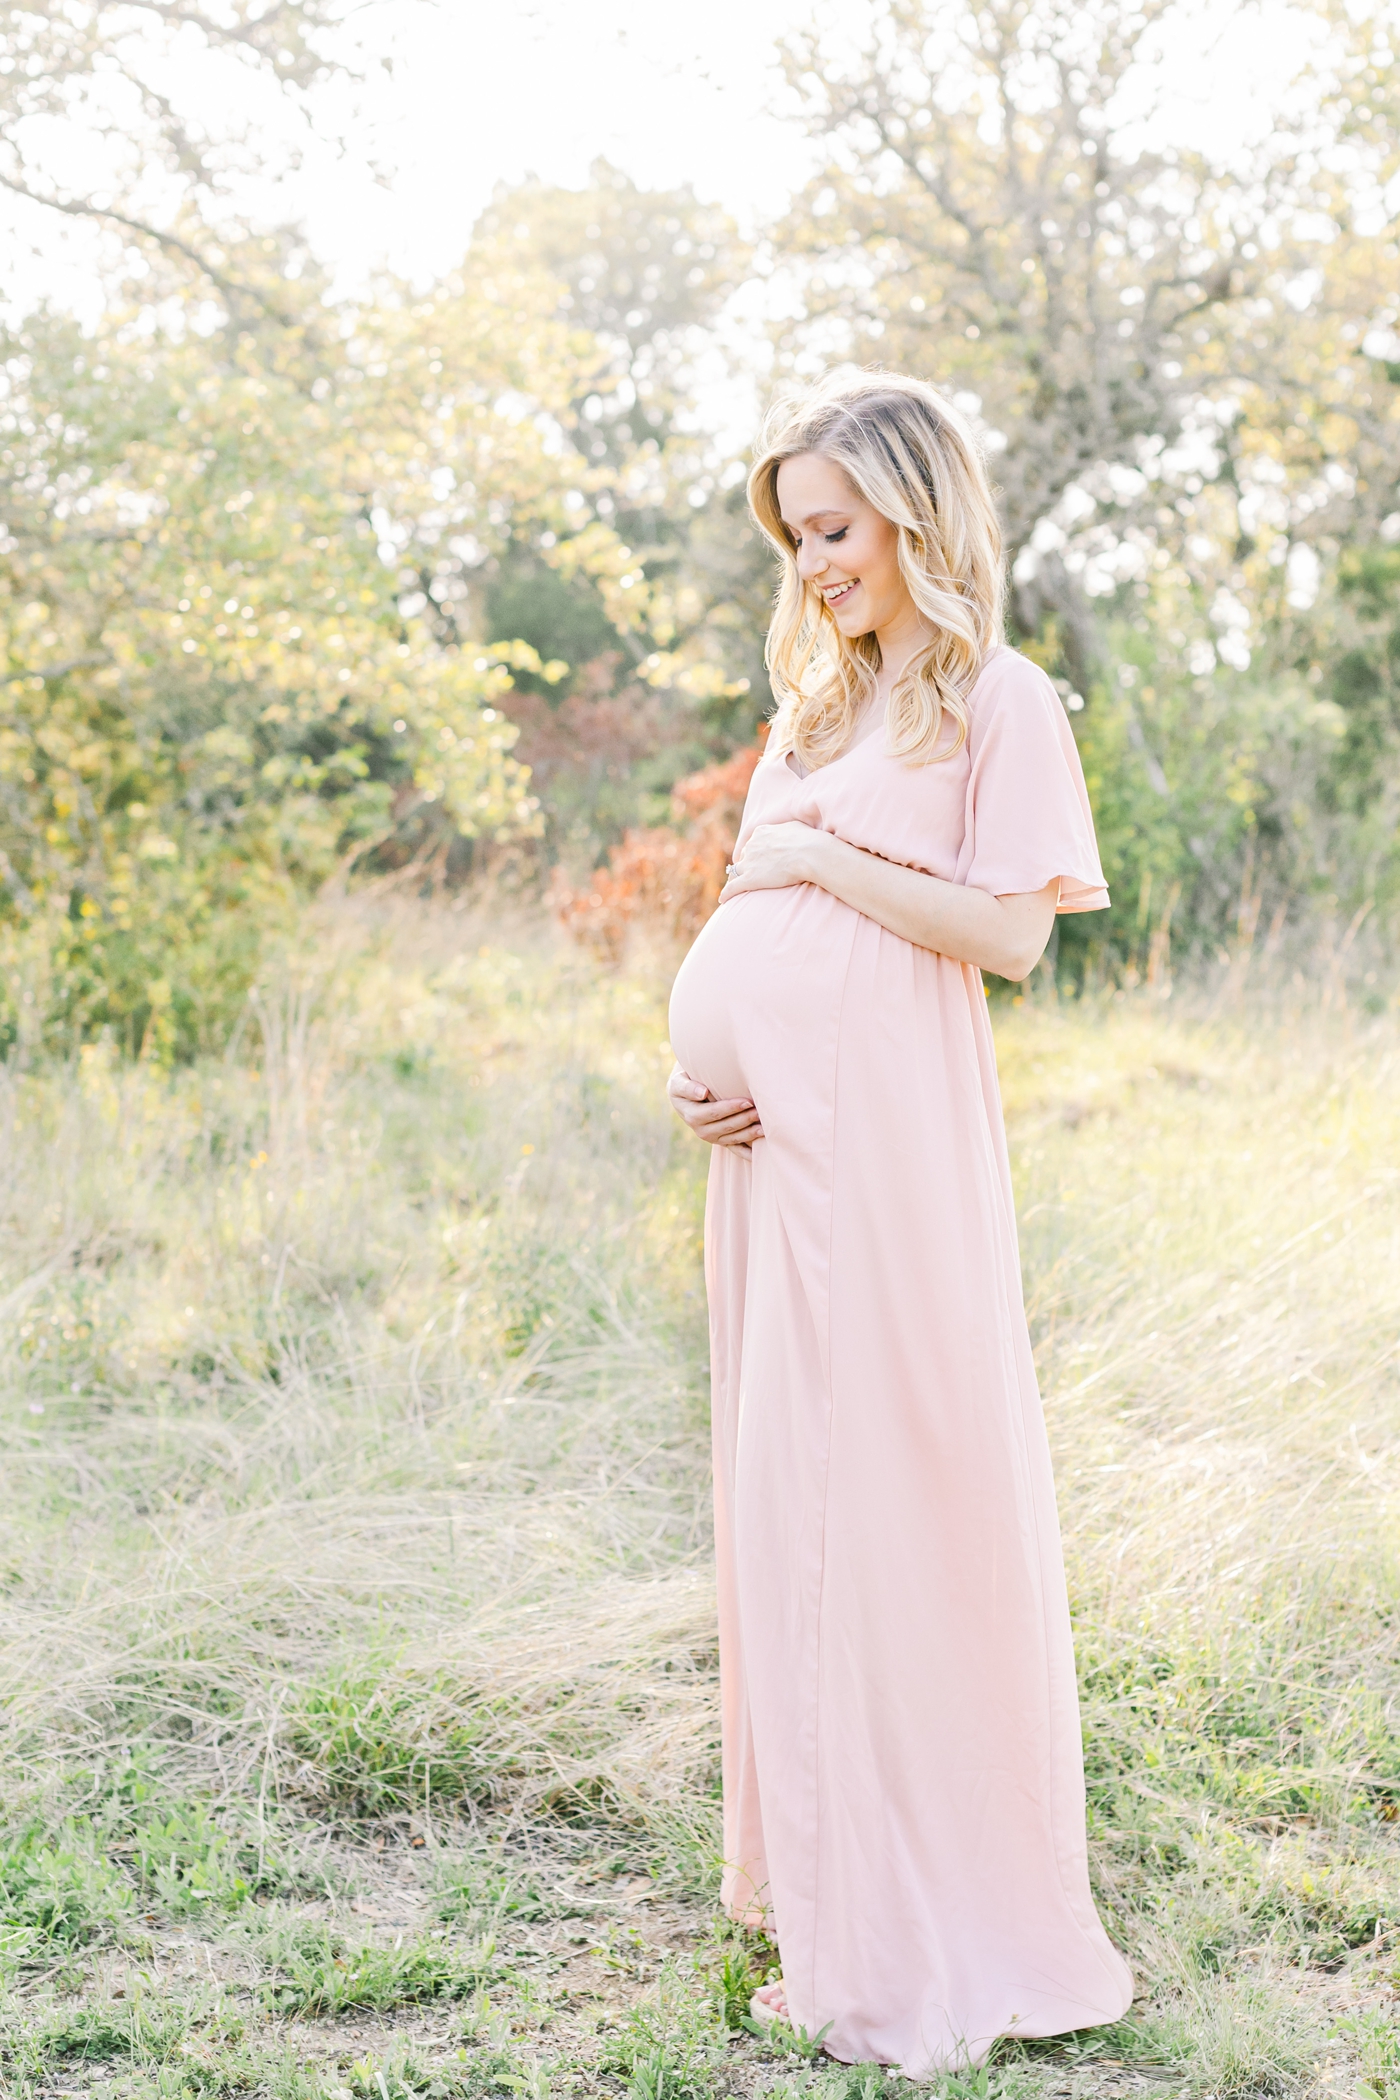 Mom wearing pink maxi dress during maternity session in Austin TX. Photo by Sana Ahmed Photography.